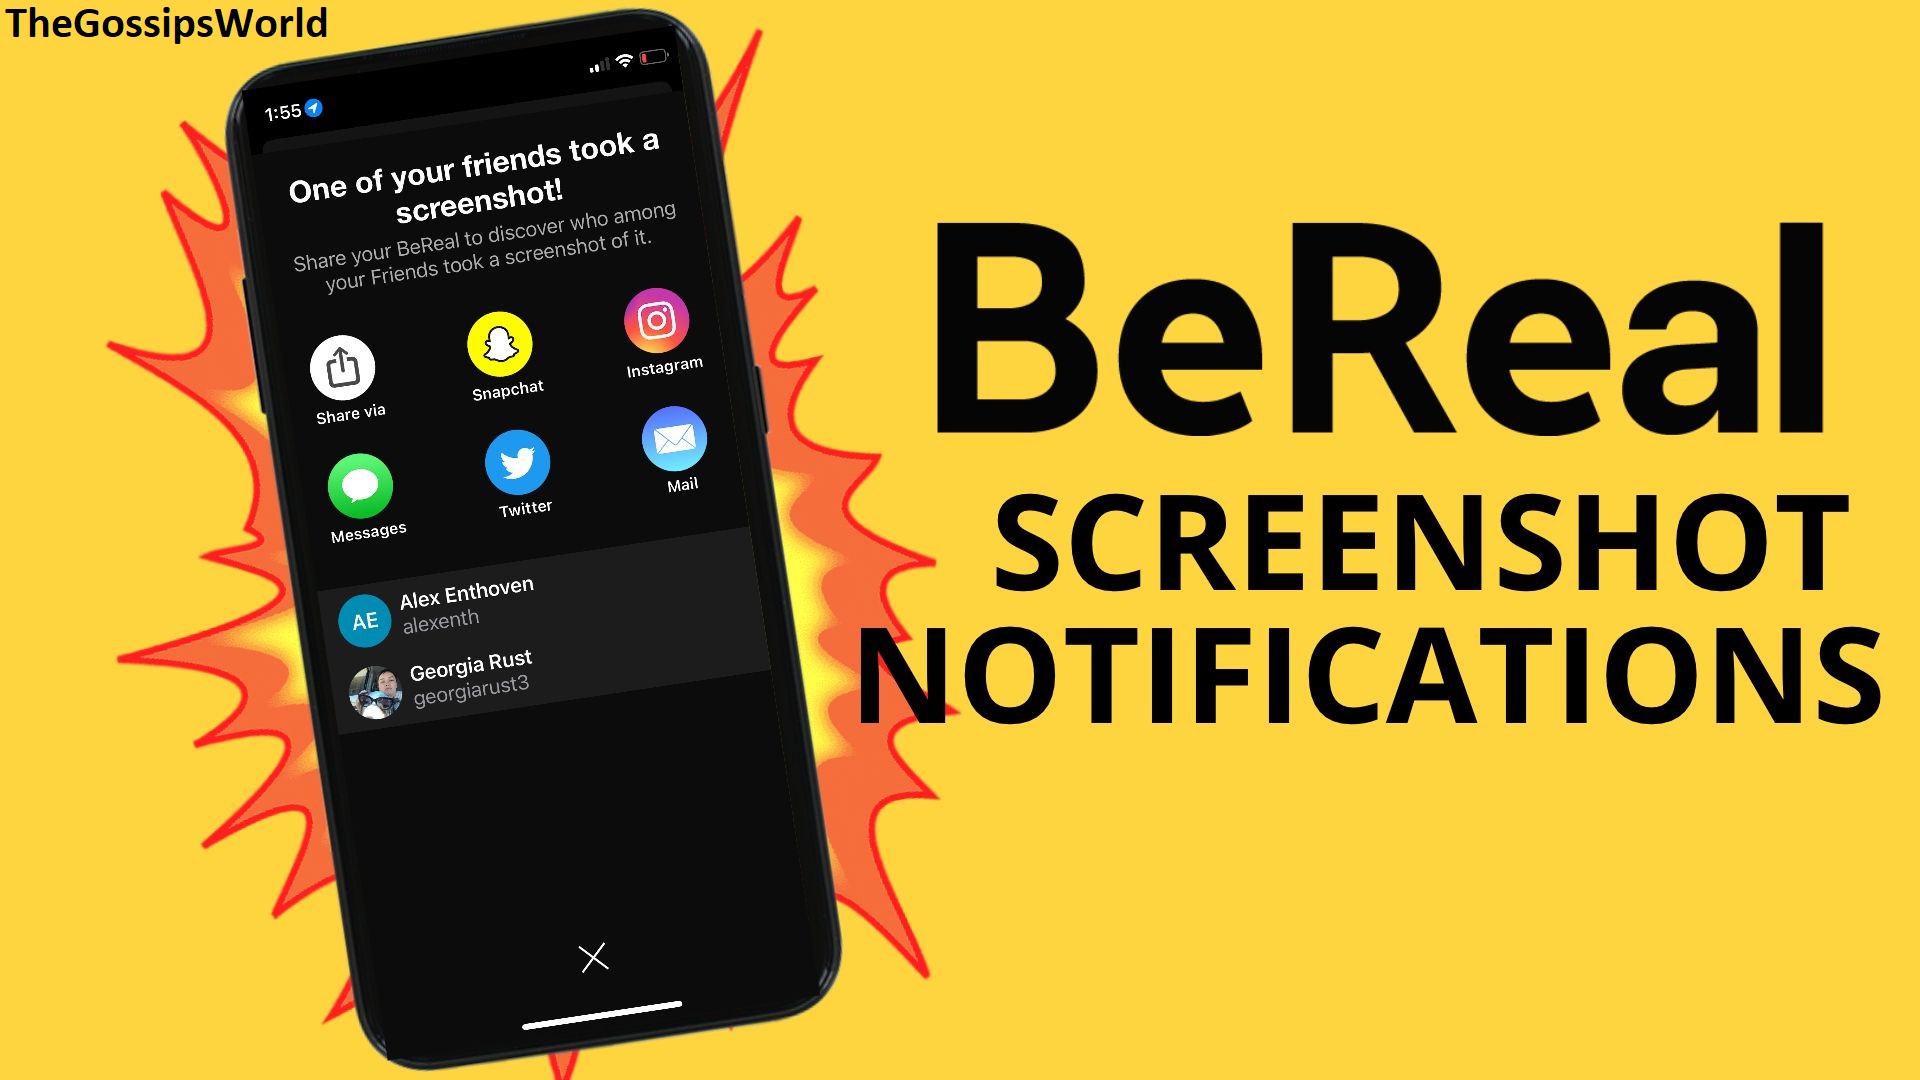 Does BeReal Notify About Screenshots To Users?